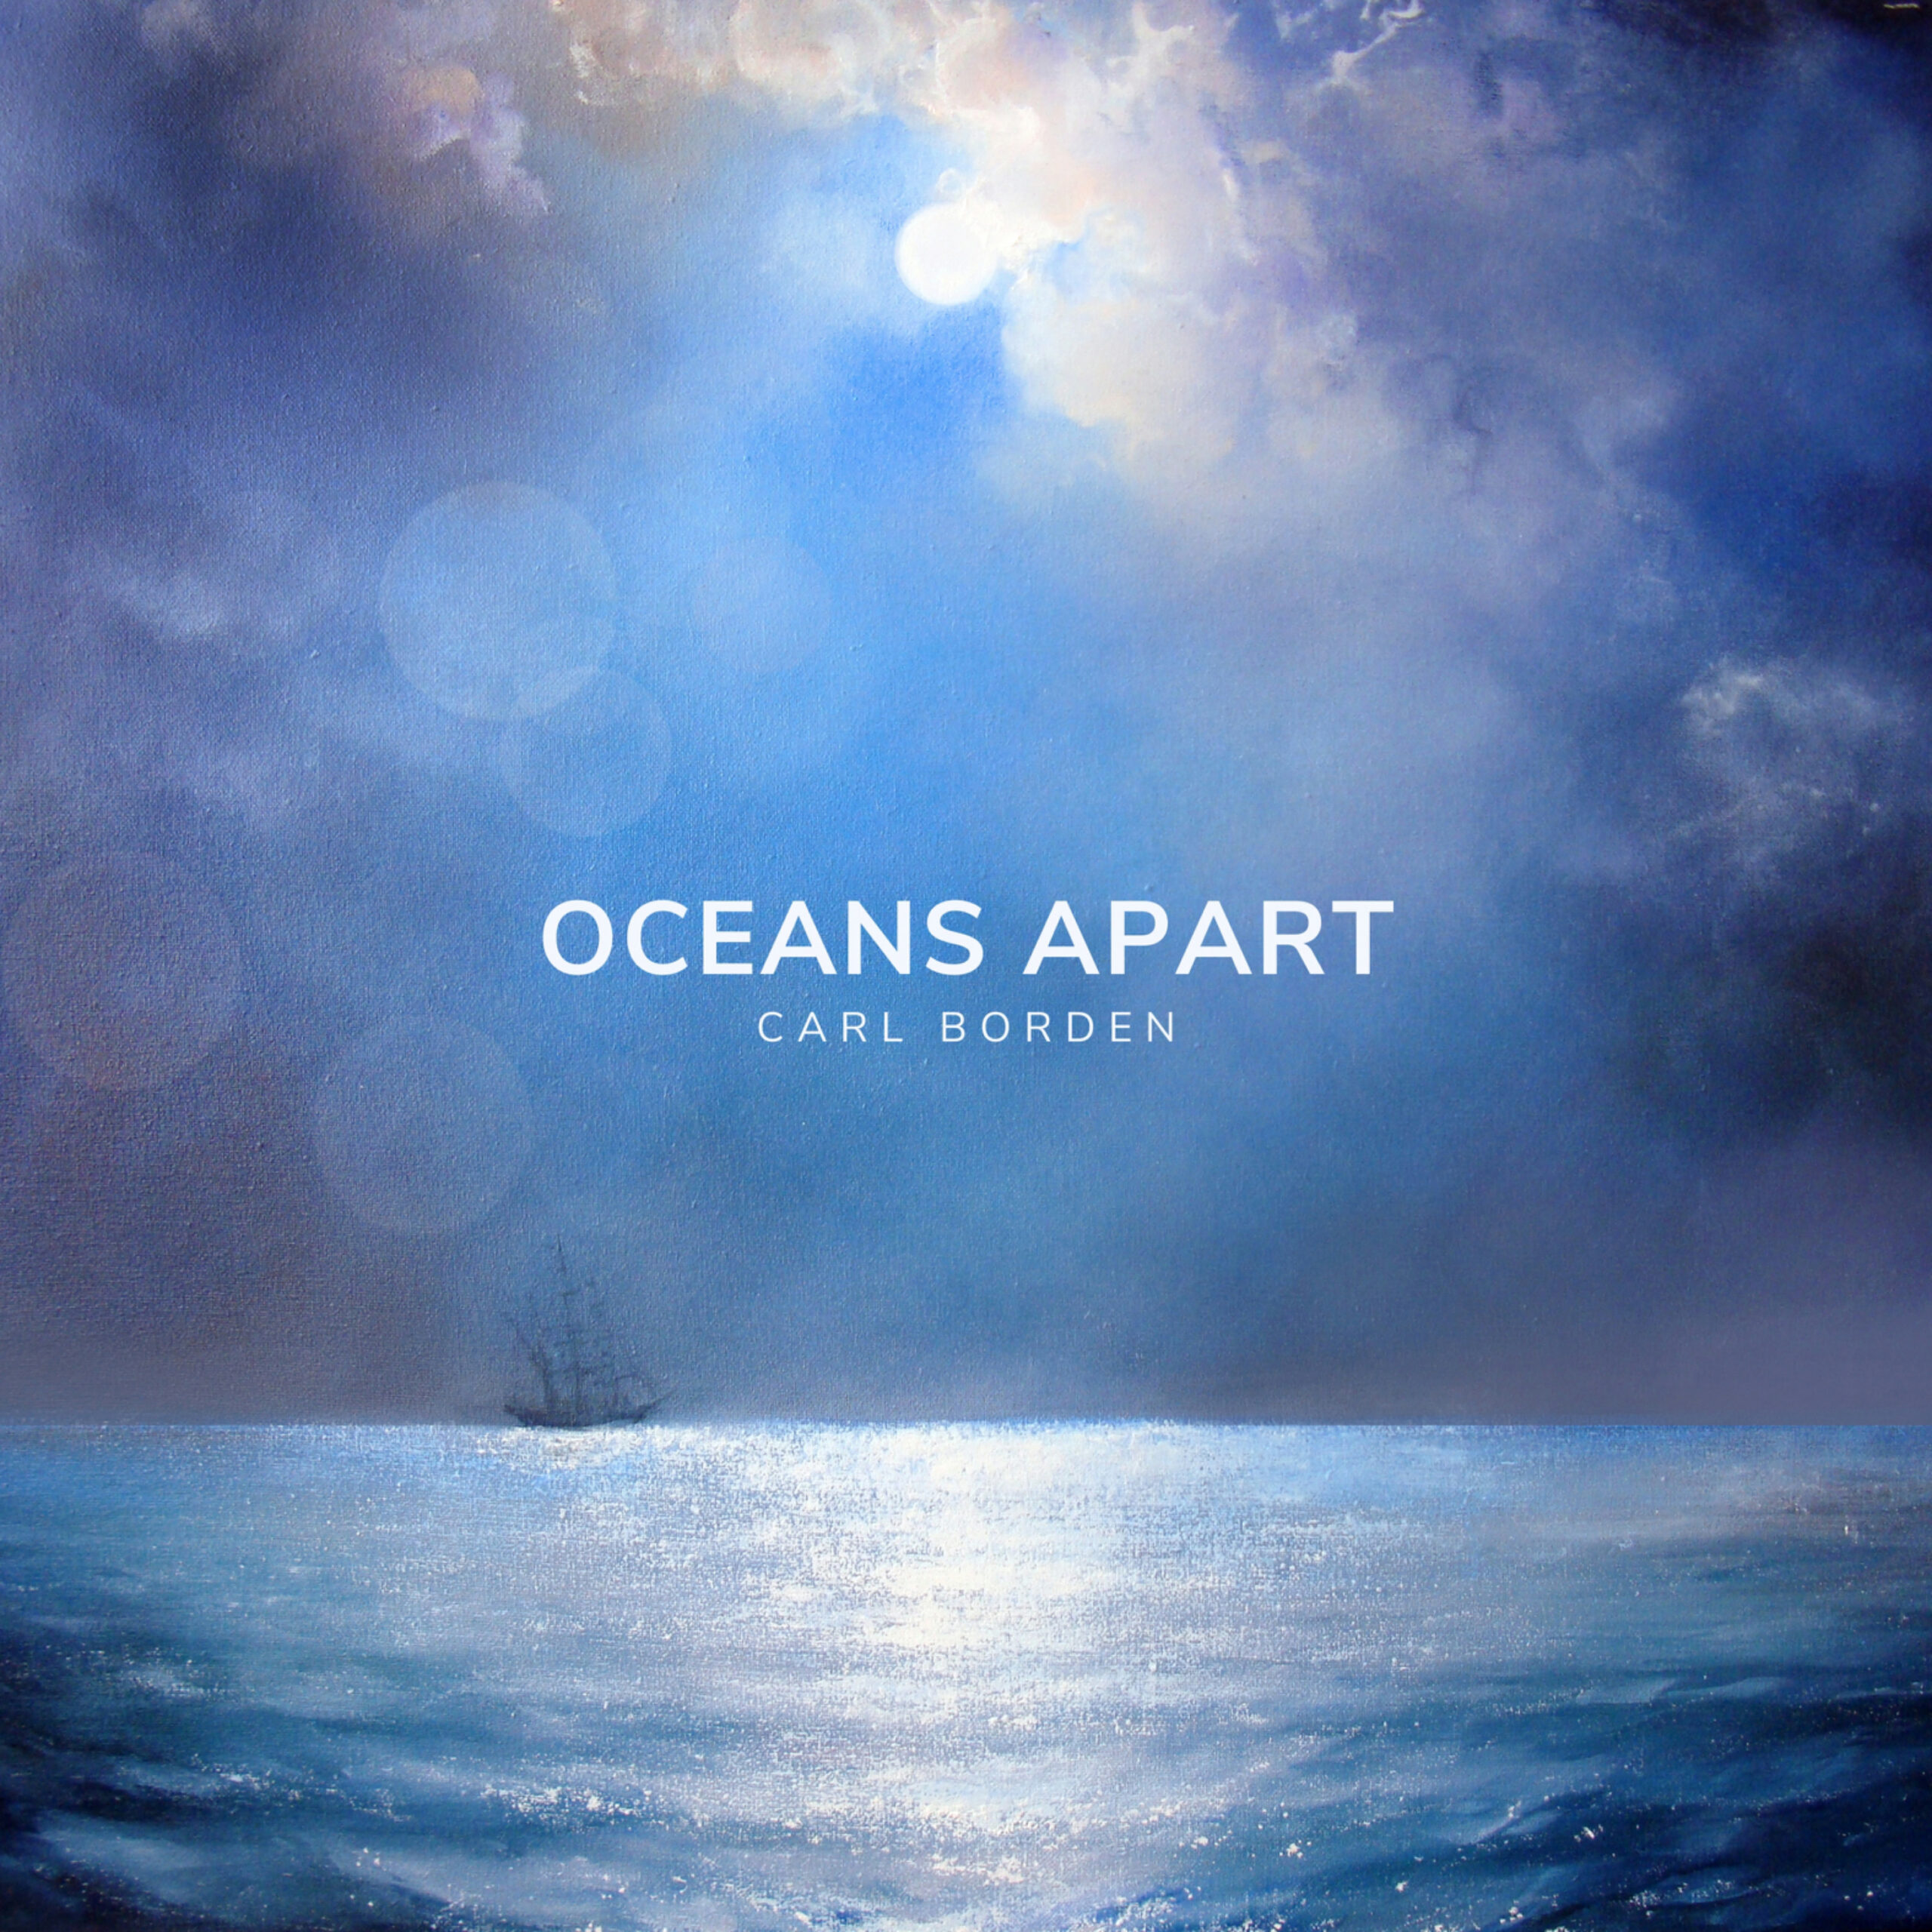 Oceans Apart Song Download: Oceans Apart MP3 Song Online Free on